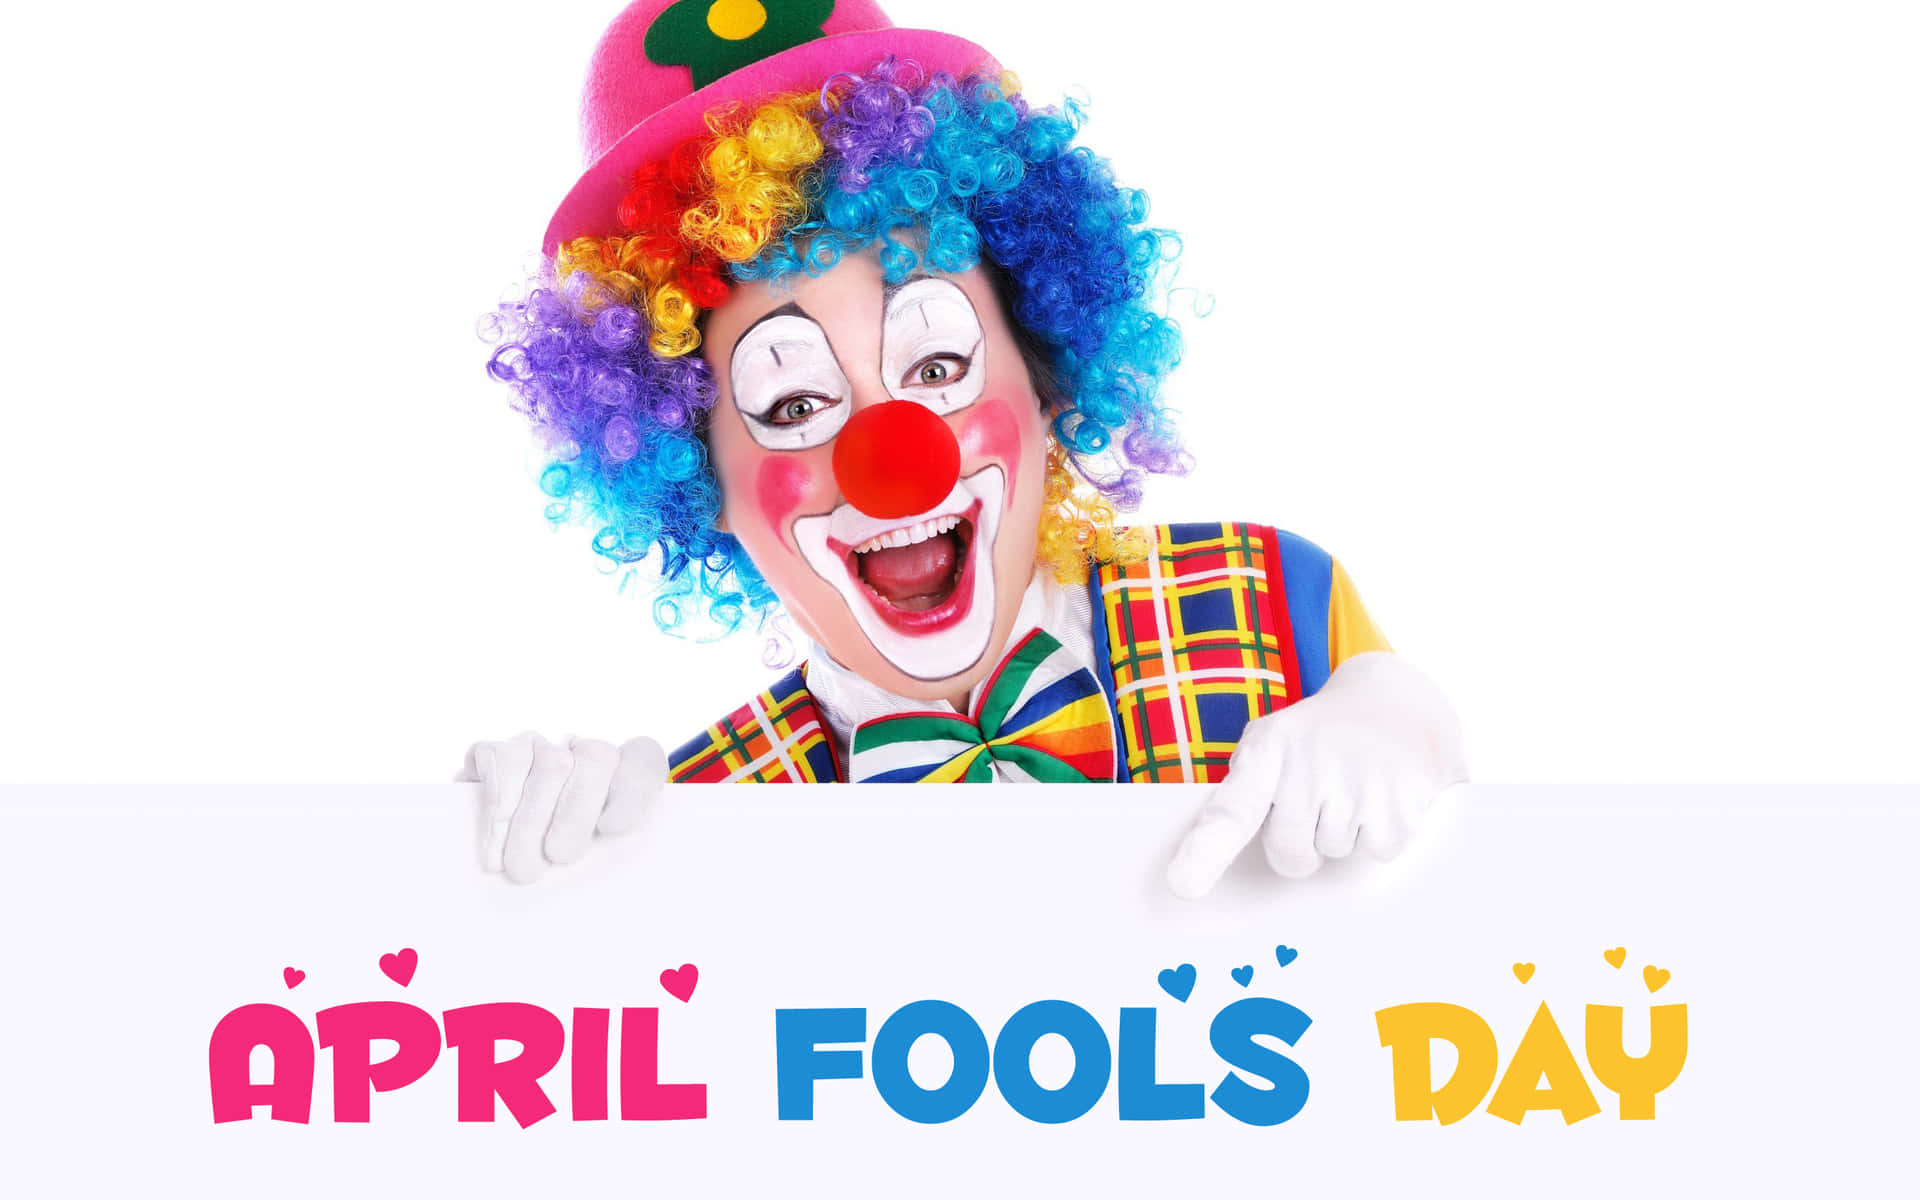 It's April Fools! Don't forget to enjoy the silly fun!